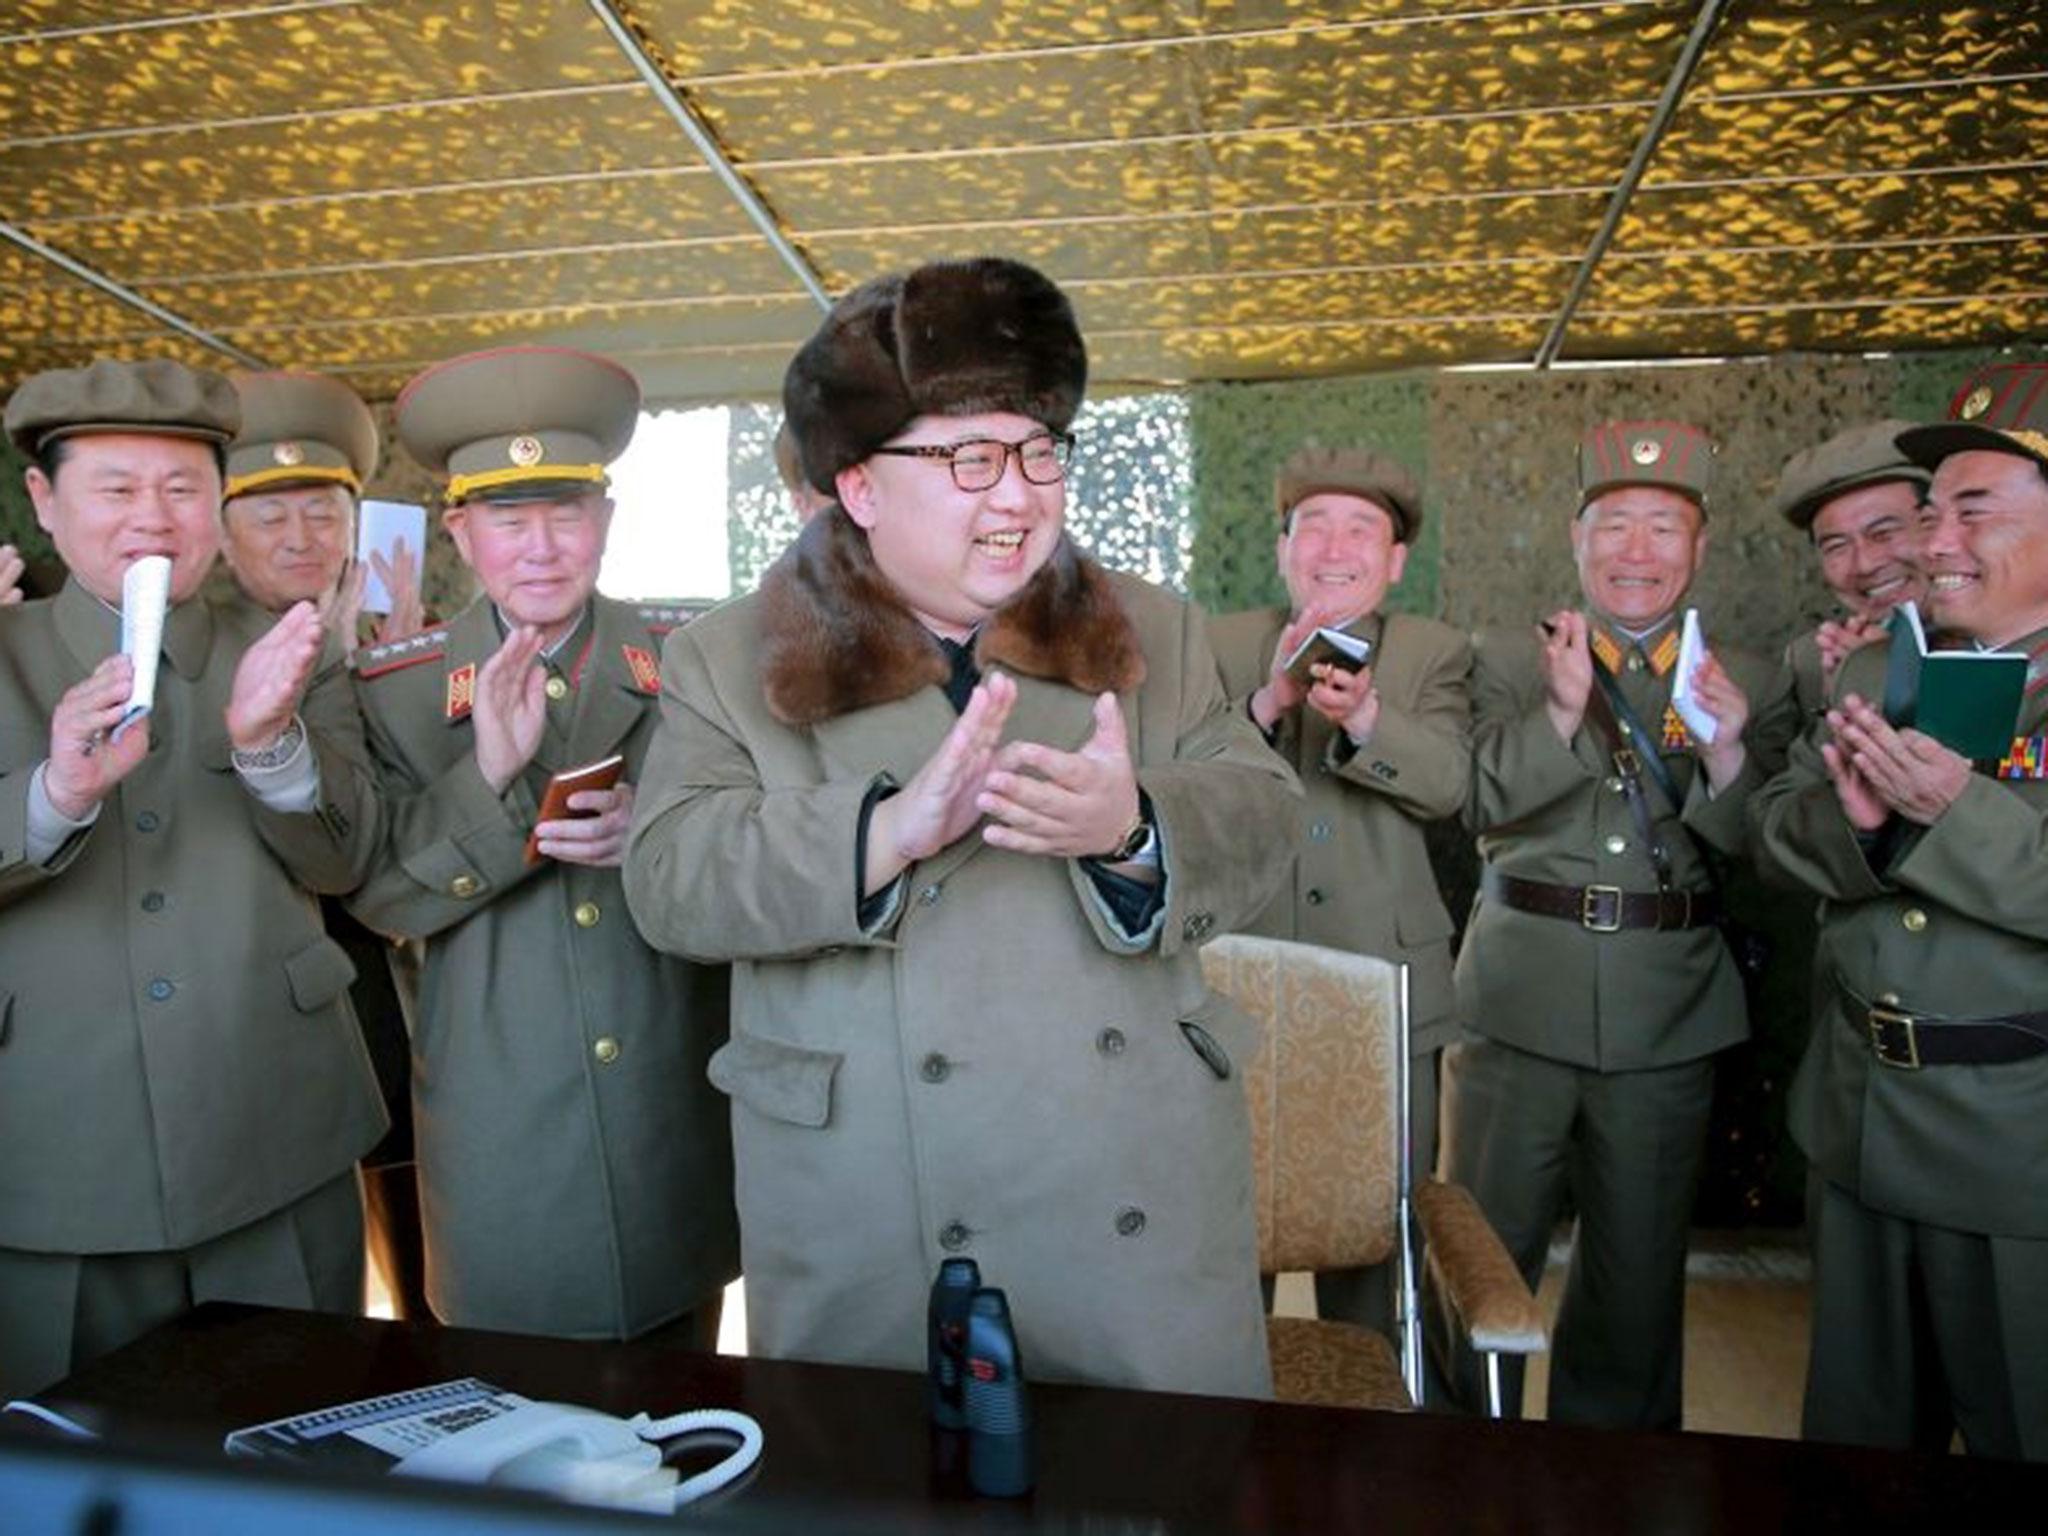 North Korean leader Kim Jong-un claps during a demonstration of a new large-caliber multiple rocket launching system at an unknown location, in this undated photo released by North Korea's Korean Central News Agency (KCNA) on 22 March, 2016